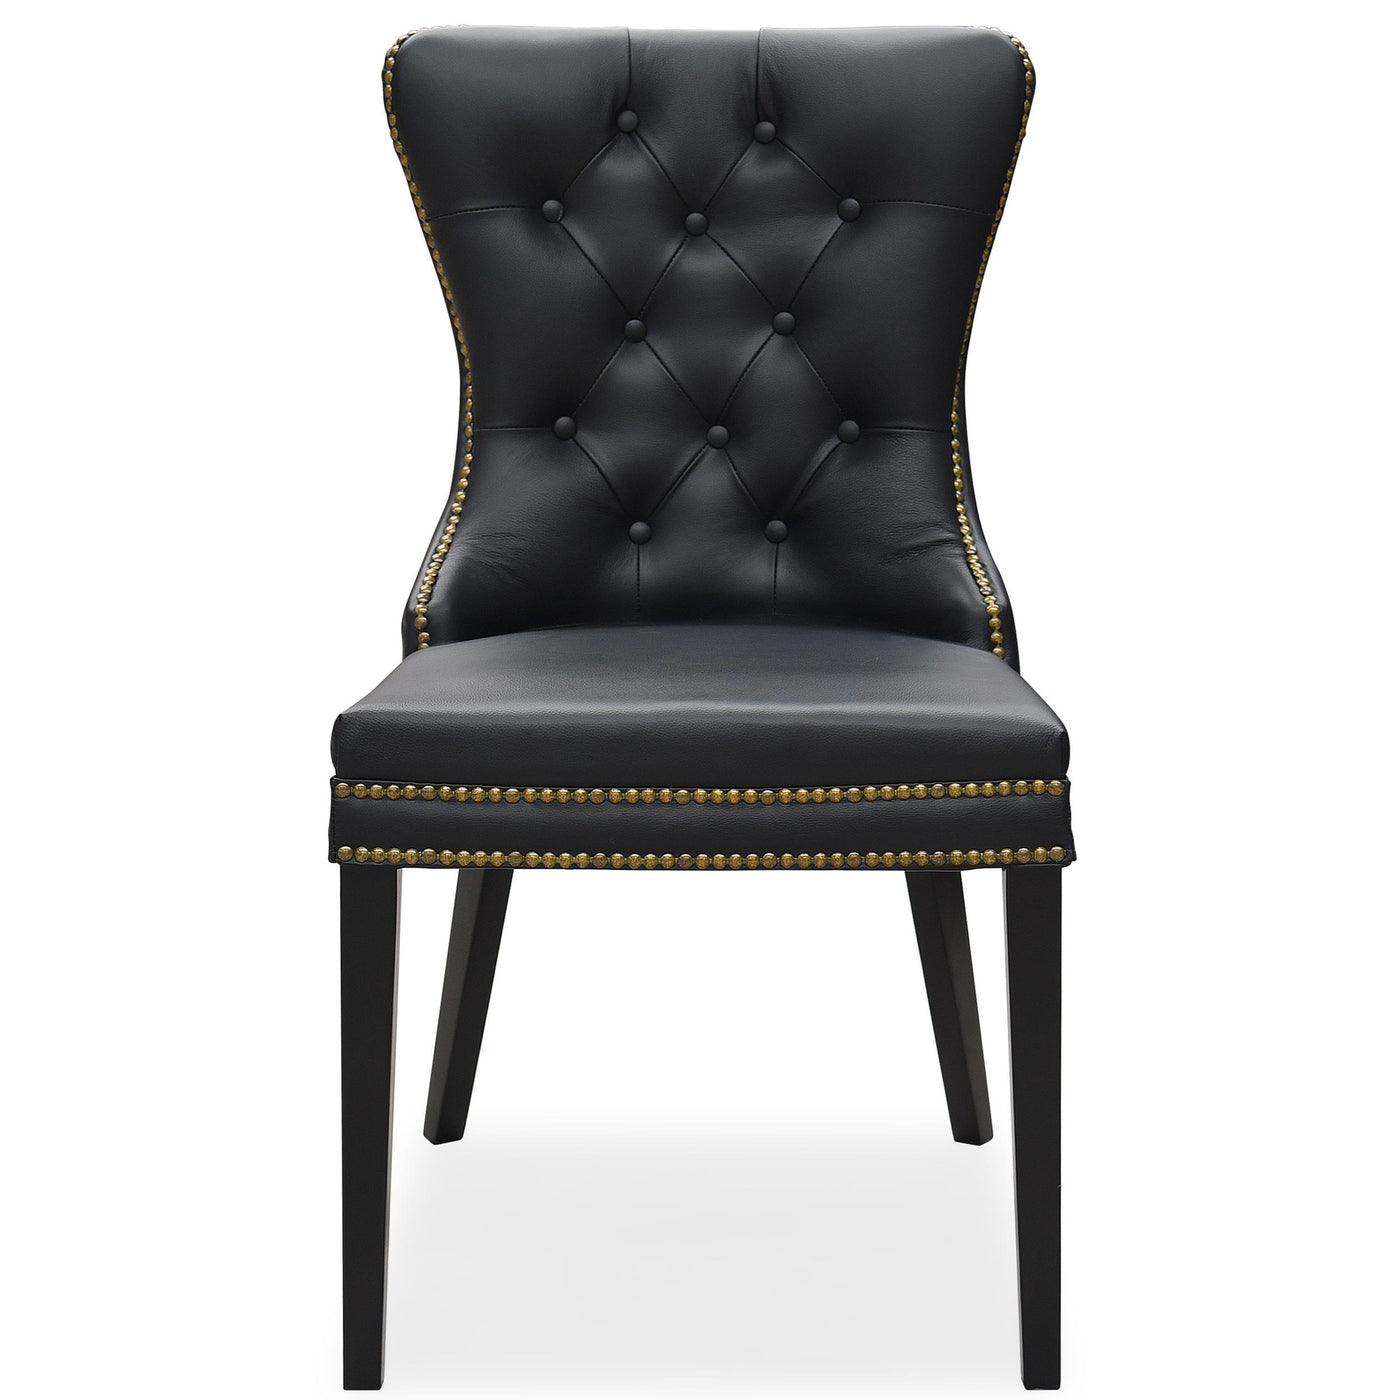 Luciano Dining Chair Black Leather